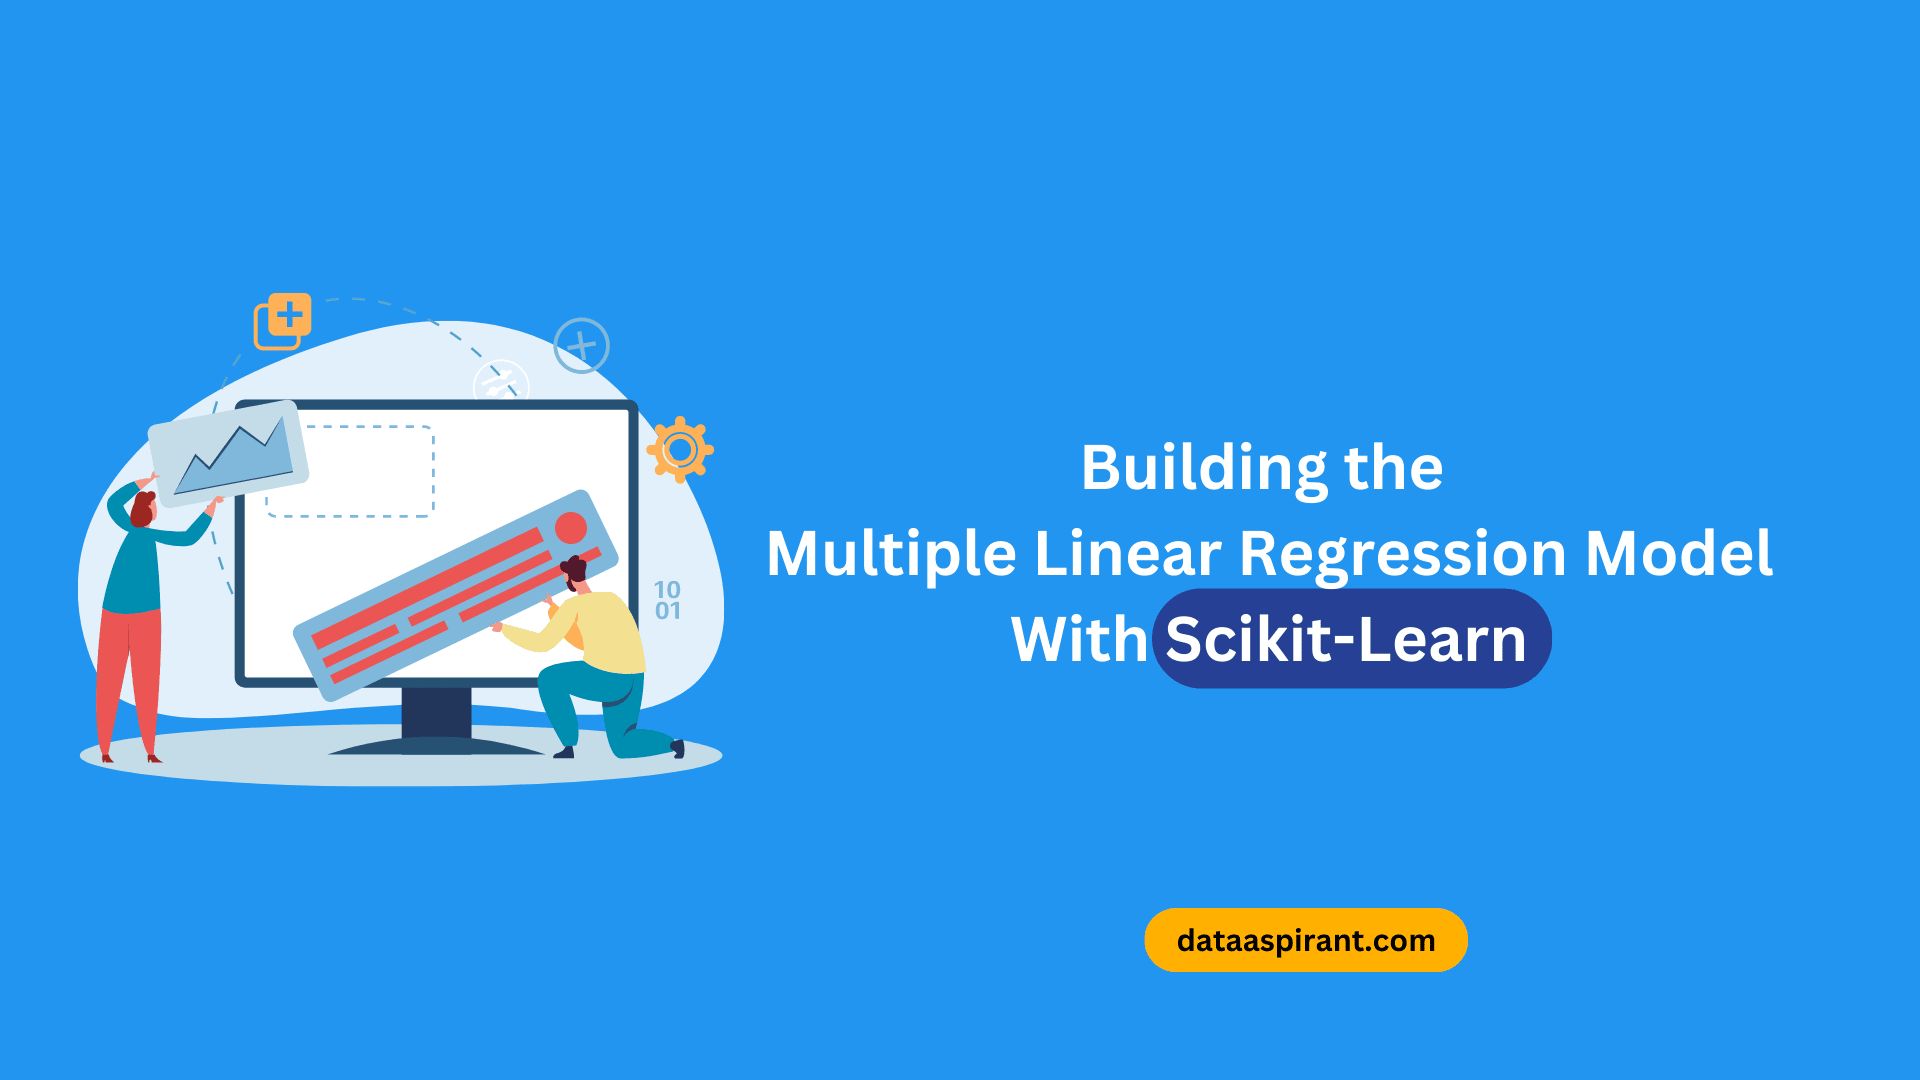 Building the Multiple Linear Regression Model With Scikit-Learn